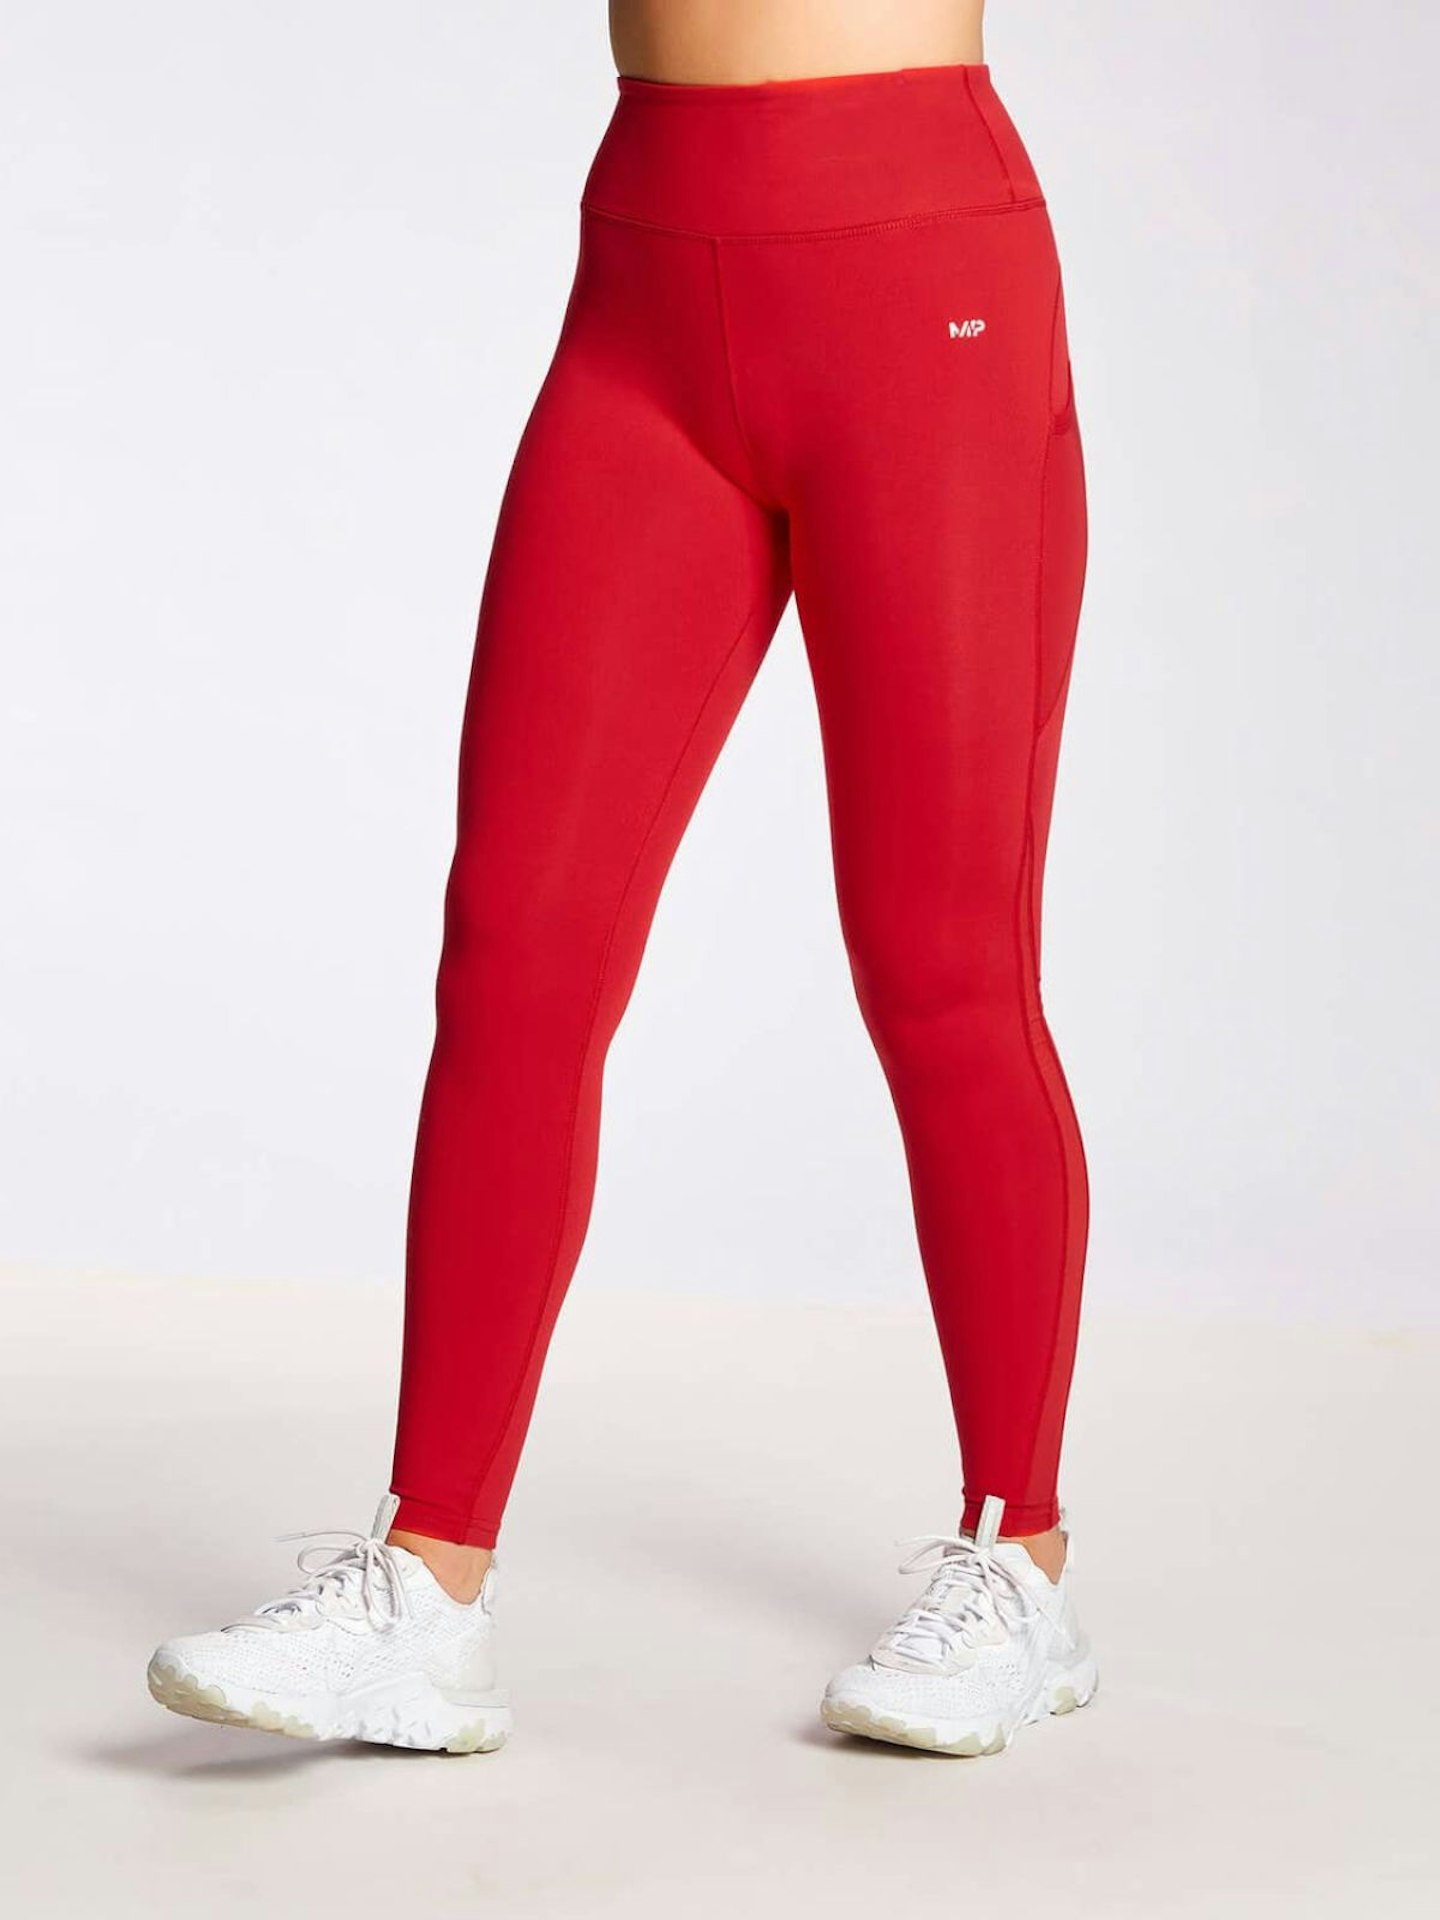 Score Free Lululemon Leggings by Trading in Your Dupes